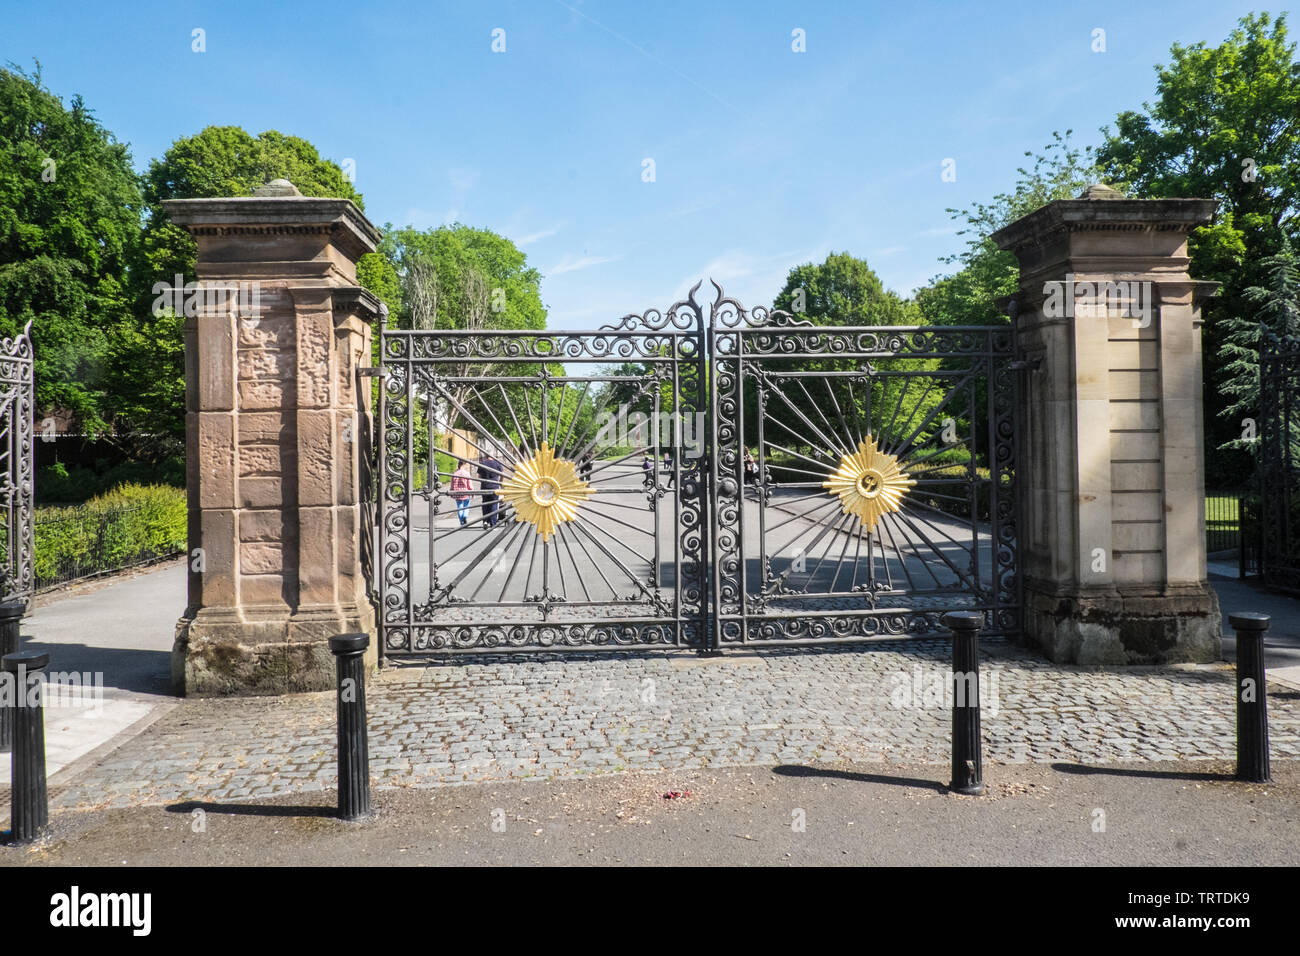 Princess Park,Princes Park,with,large,ornate,gate,entrance,Liverpool 8,Toxteth,Liverpool,Merseyside,Northern,city,England,UK,GB,Great Britain,Europe, Stock Photo